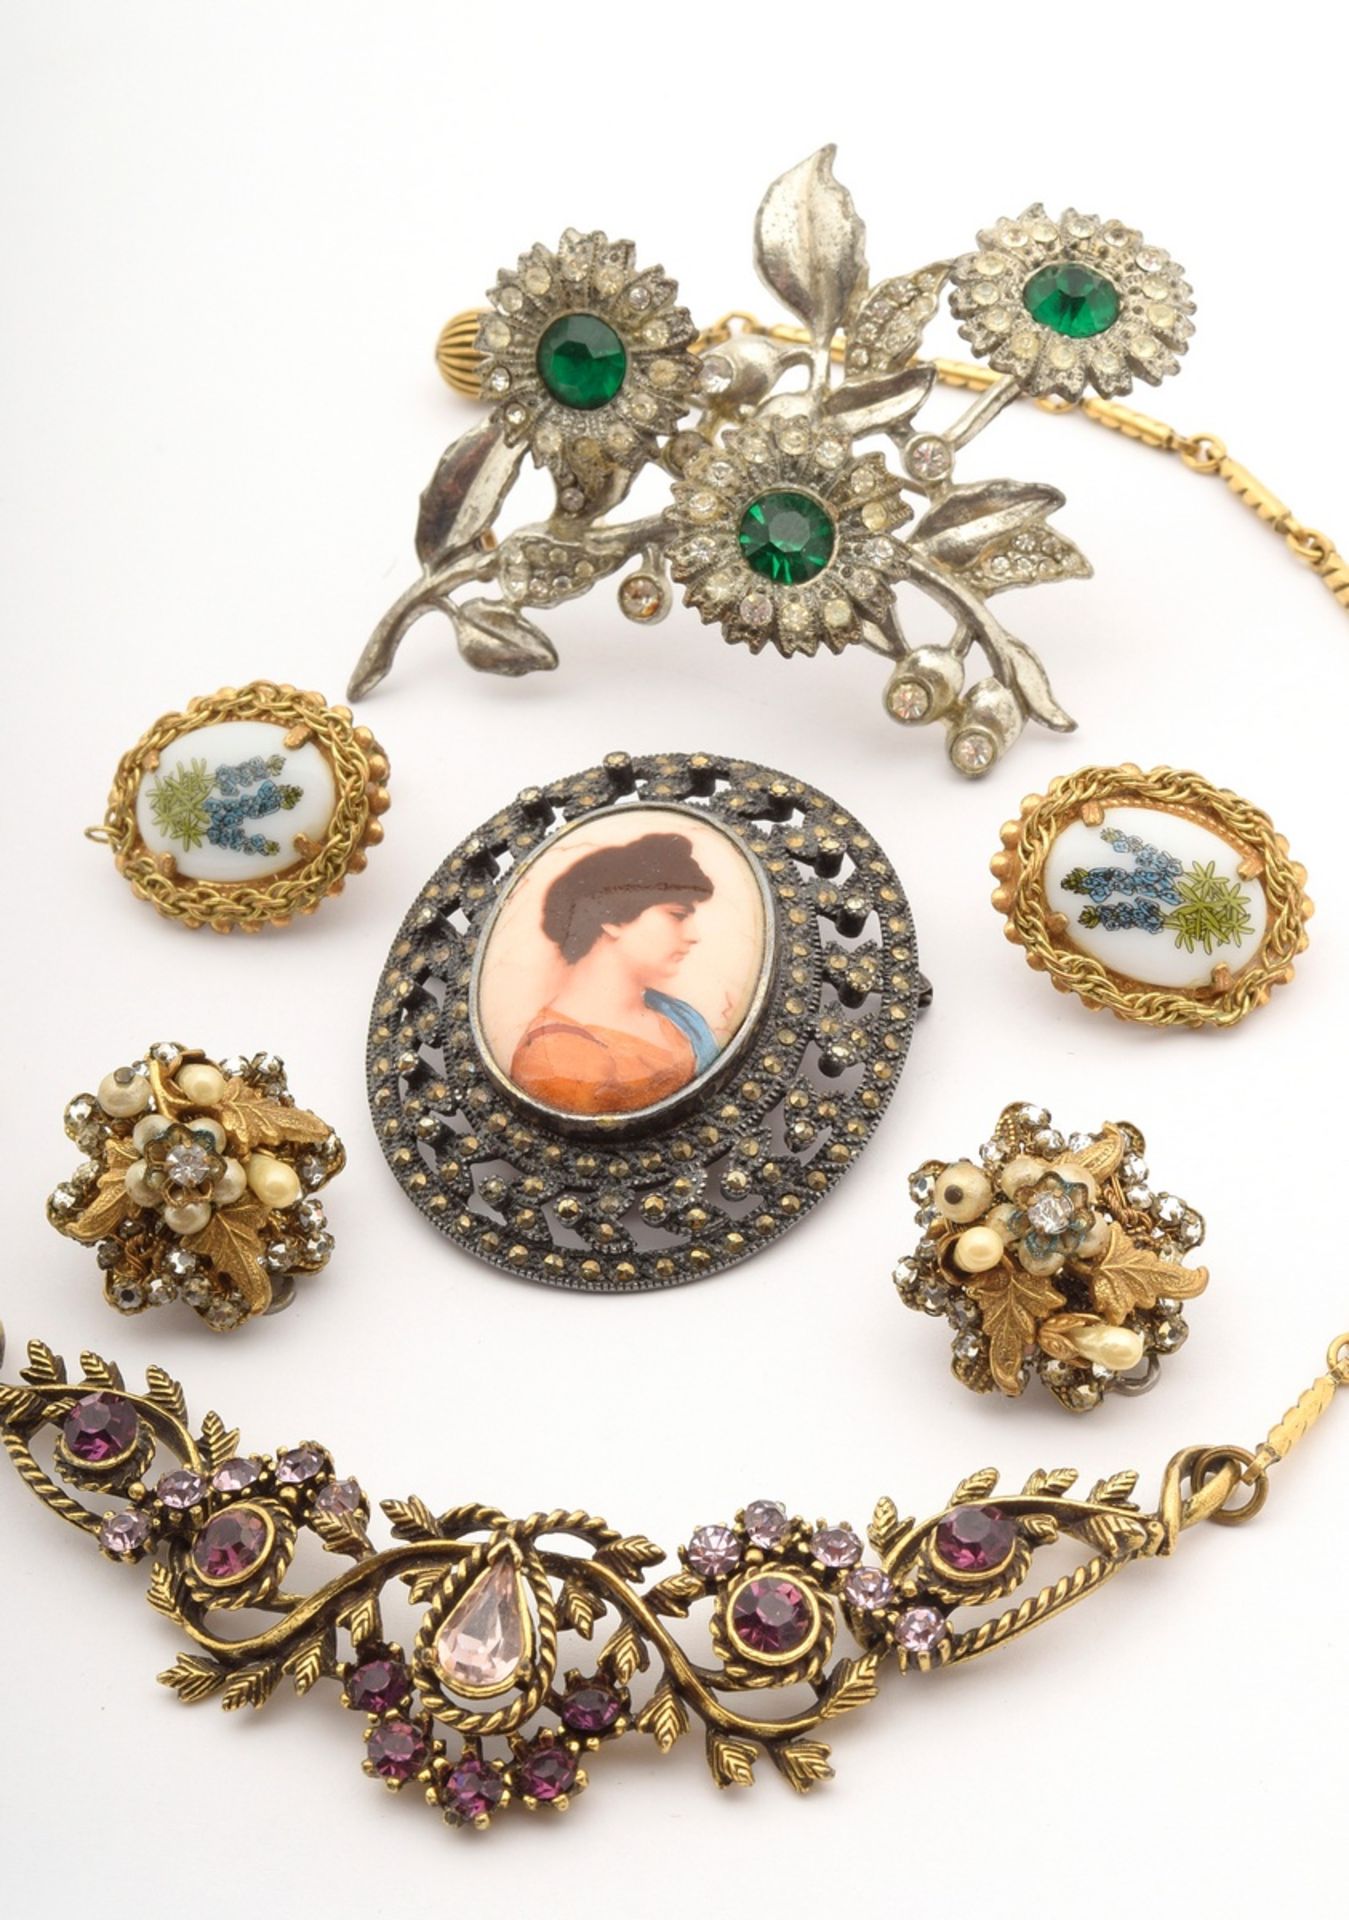 7 pieces of costume jewellery, gold plated and in white metal with rhinestones, plastic and artific